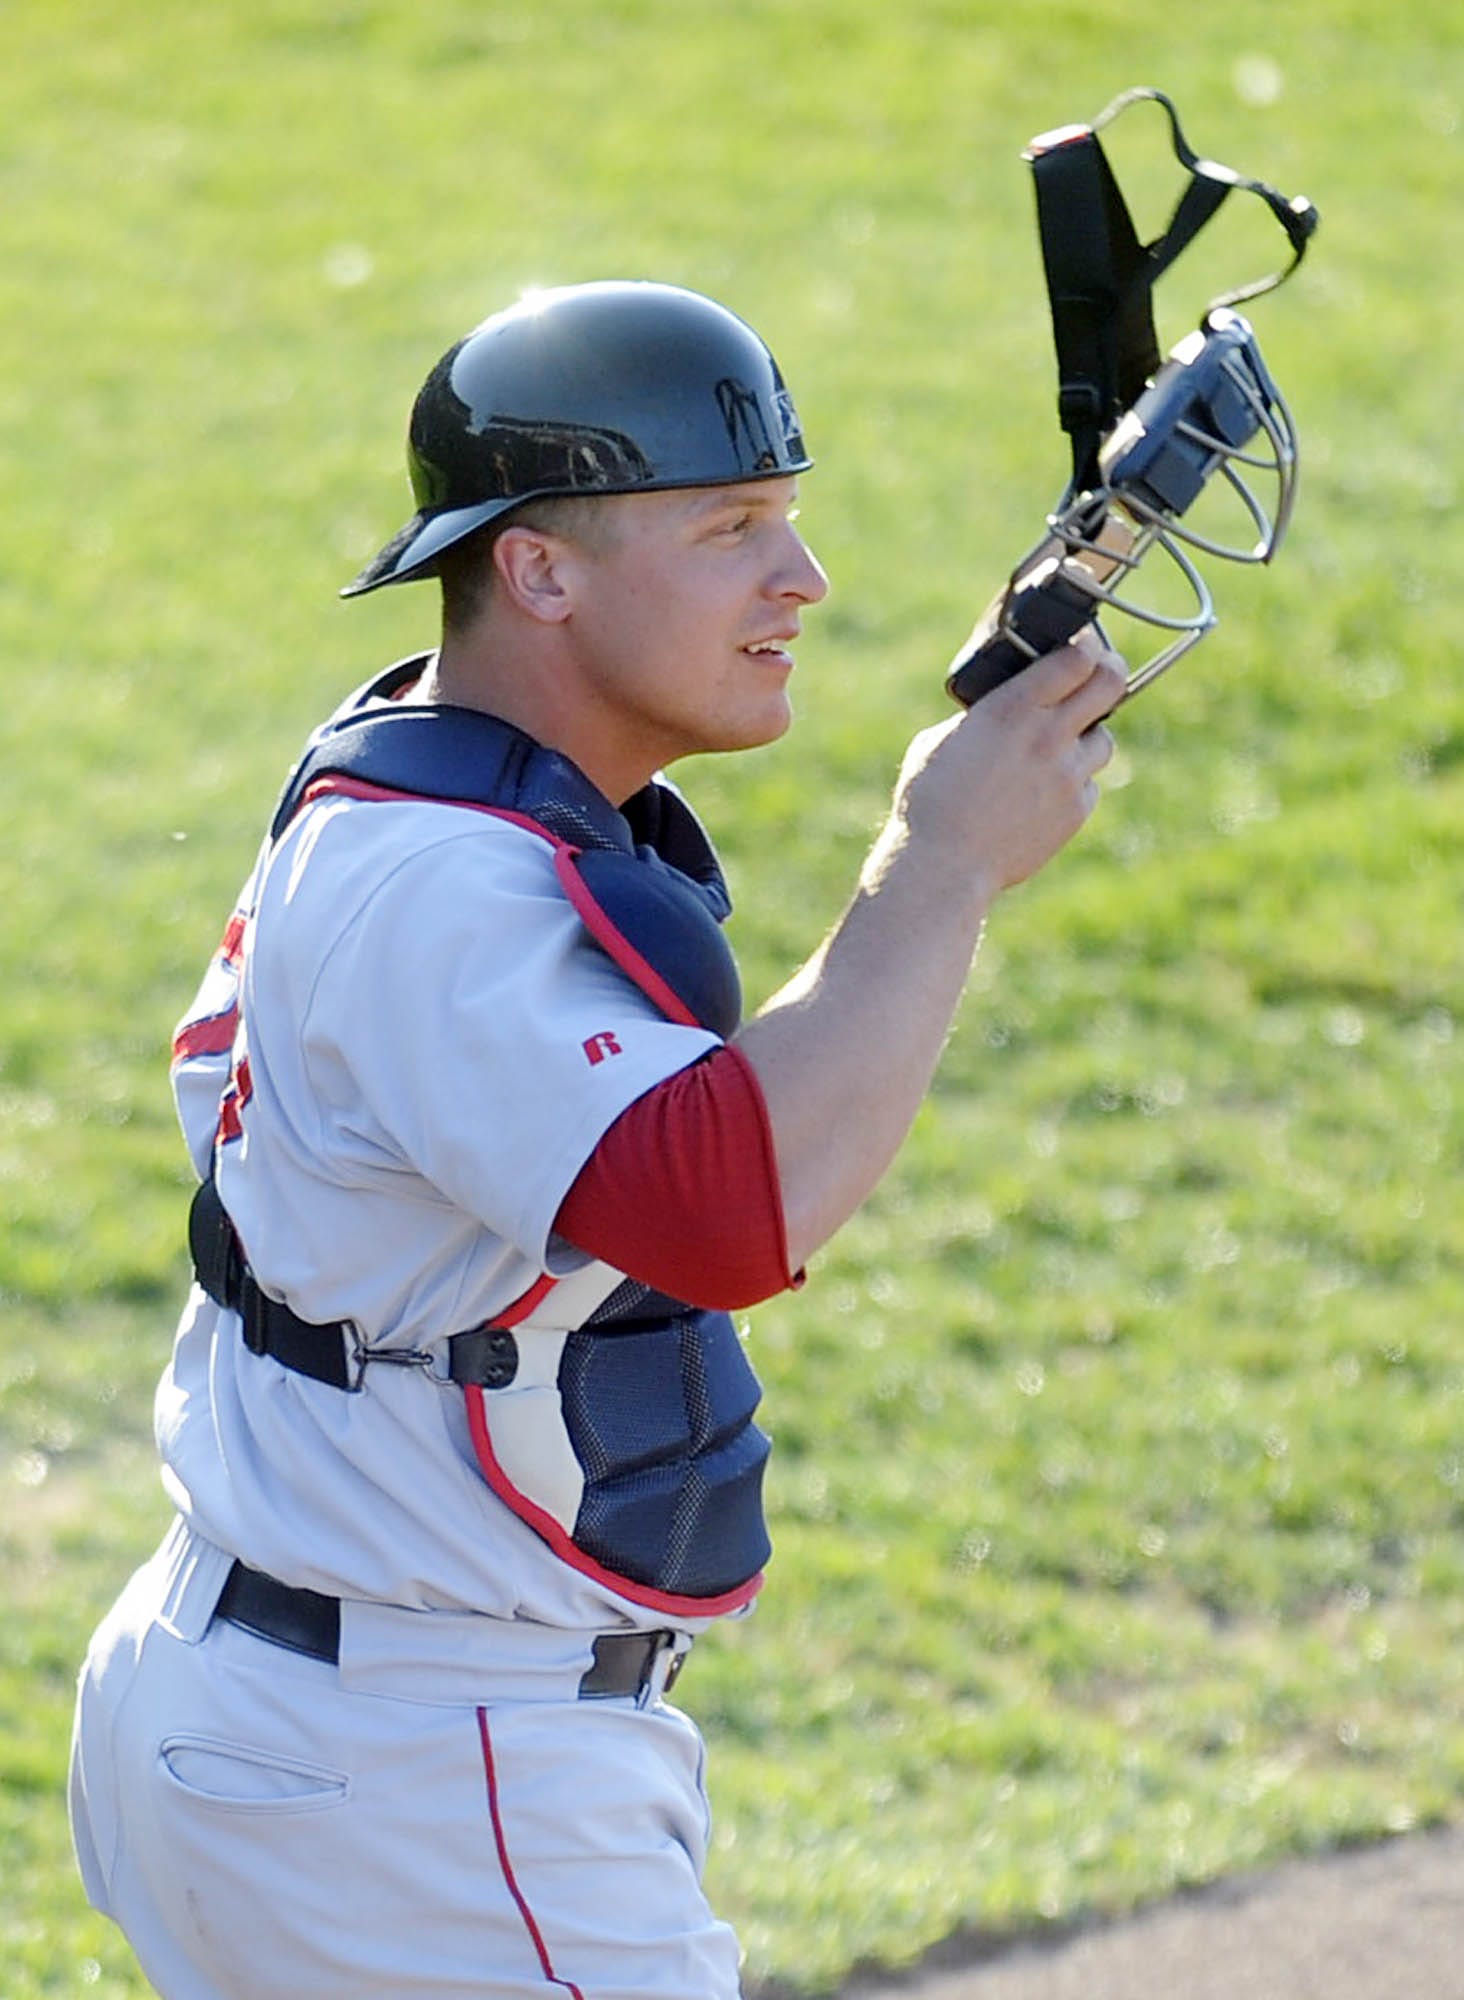 Erie Native Tim Federowicz Will Catch For Team Usa In Olympic Baseball